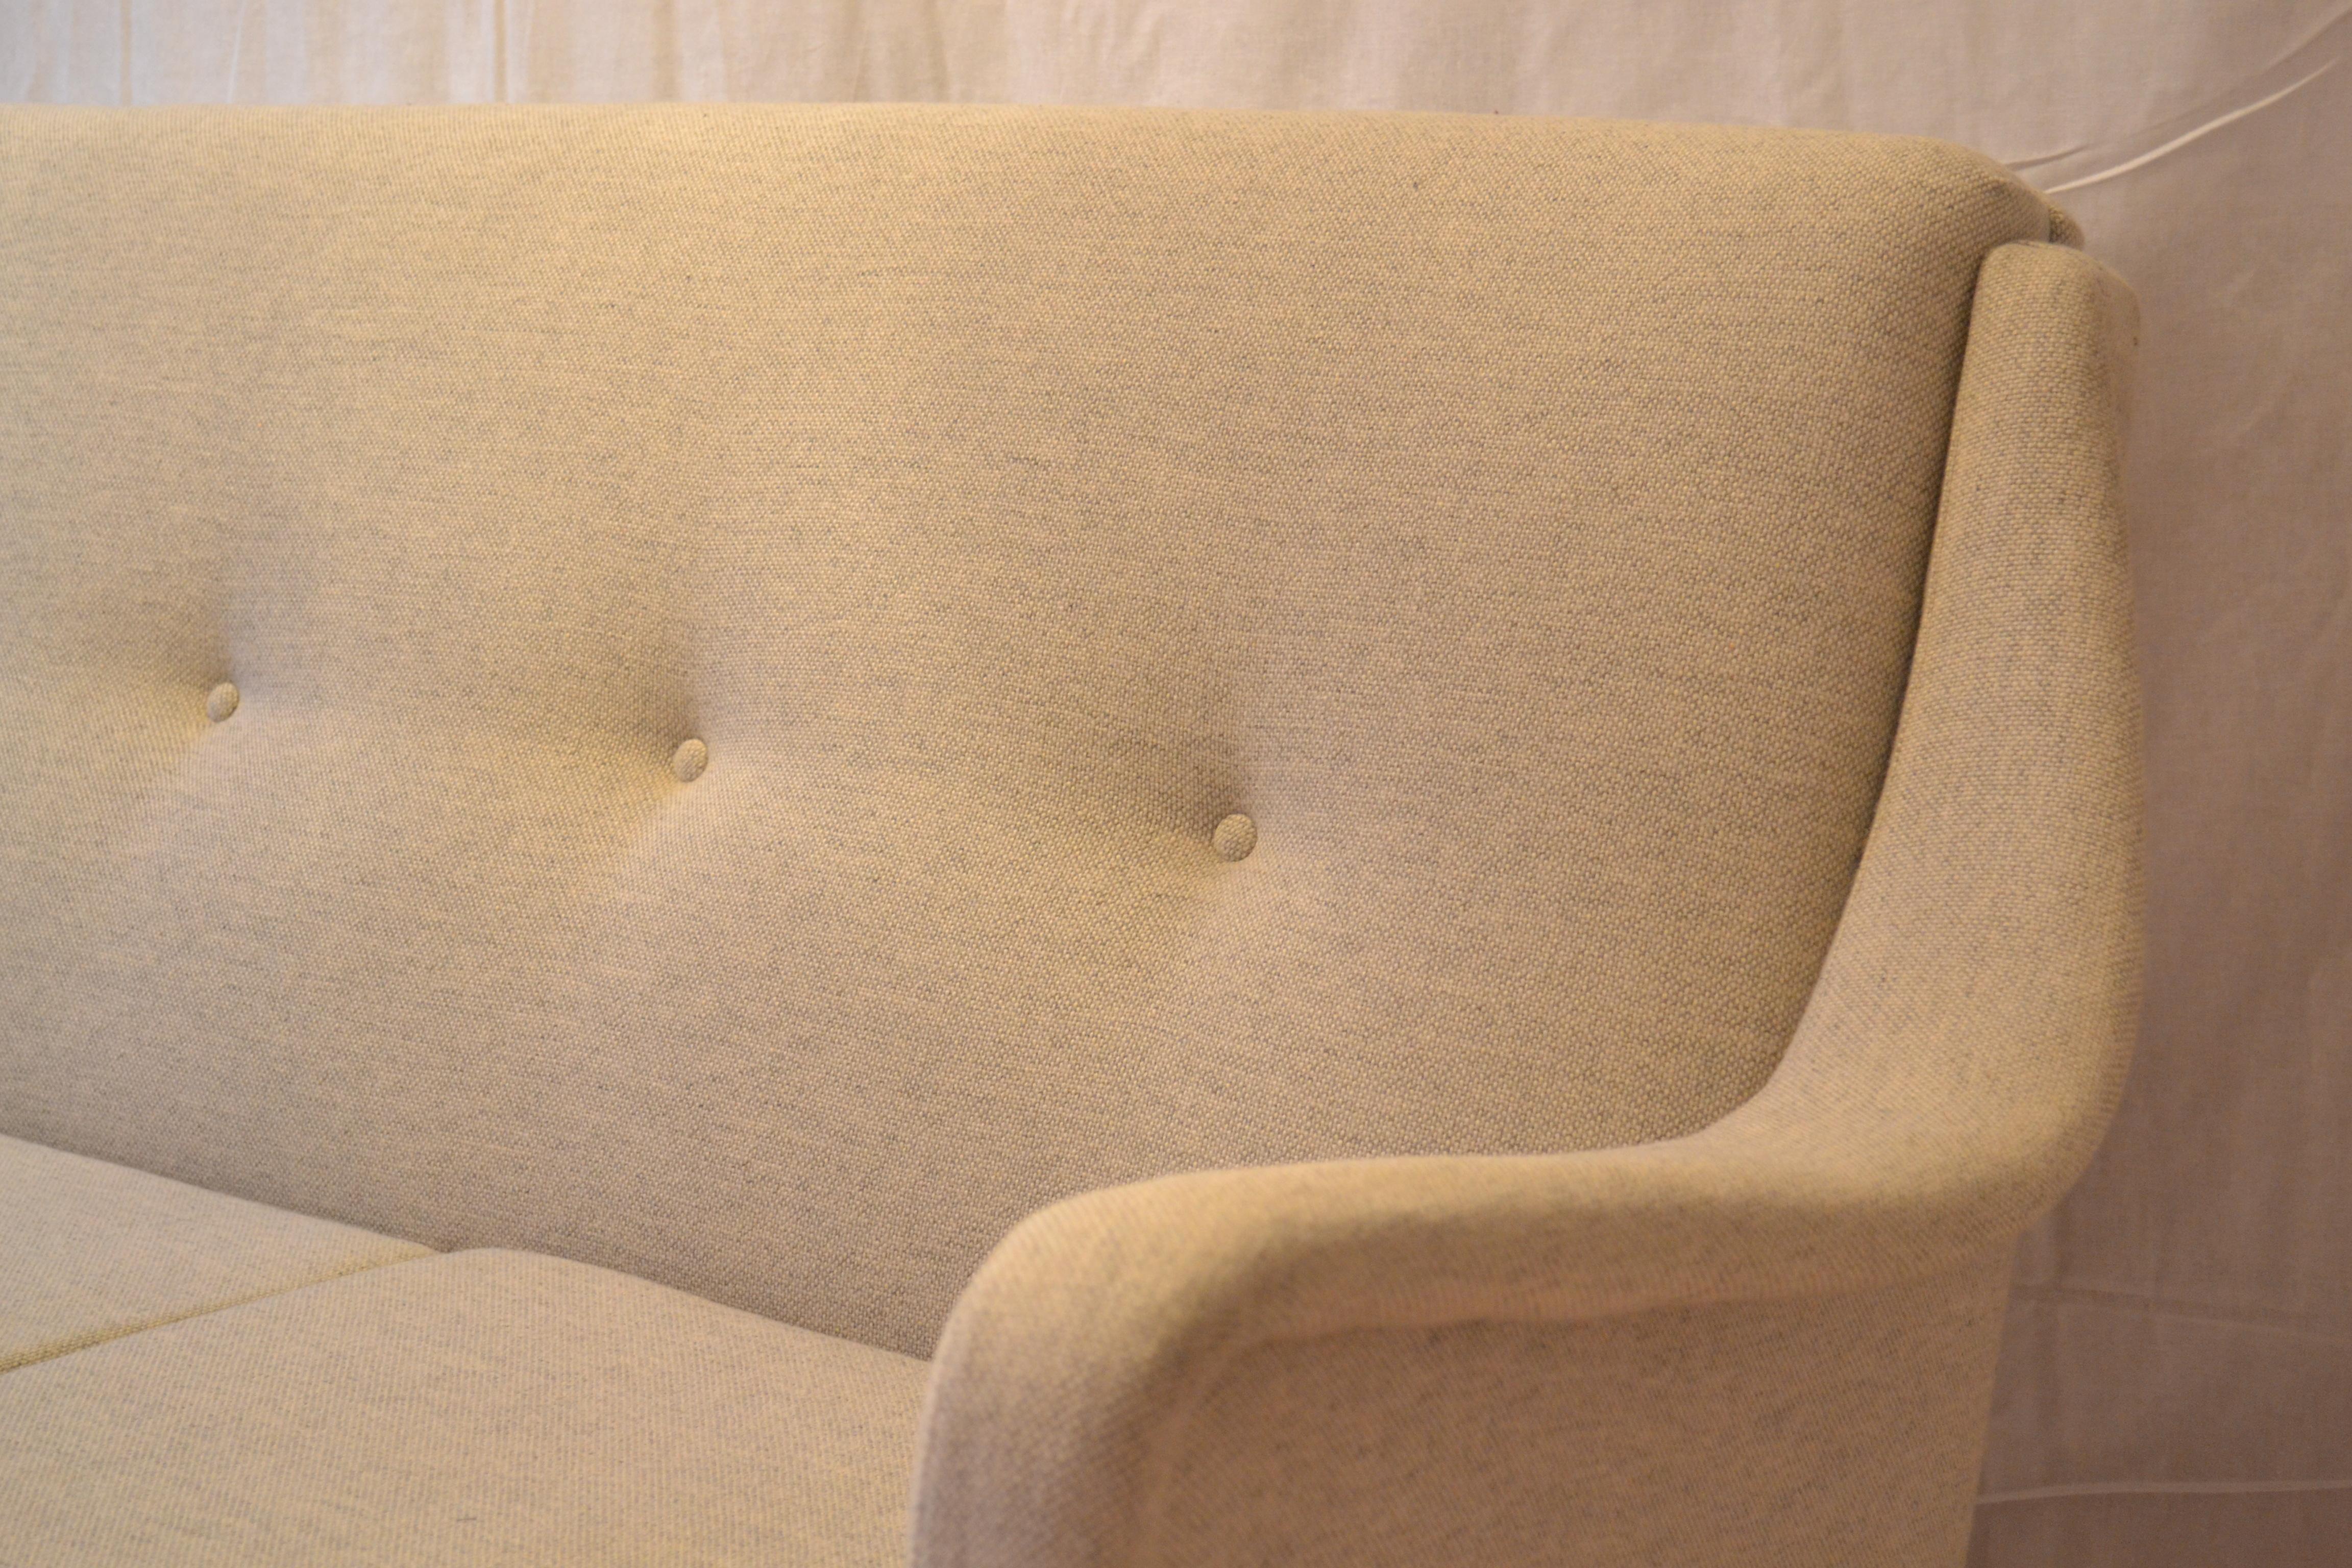 Fritz Hansen sofa designed by Folke Ohlsson for the 1950s Dux company In the 1950s and 1960s, Fritz Hansen made sofas and armchairs for Folke Ohlsson Dux. Fully original and signed sofa. High-quality woolen upholstery. A classic of Danish design. A